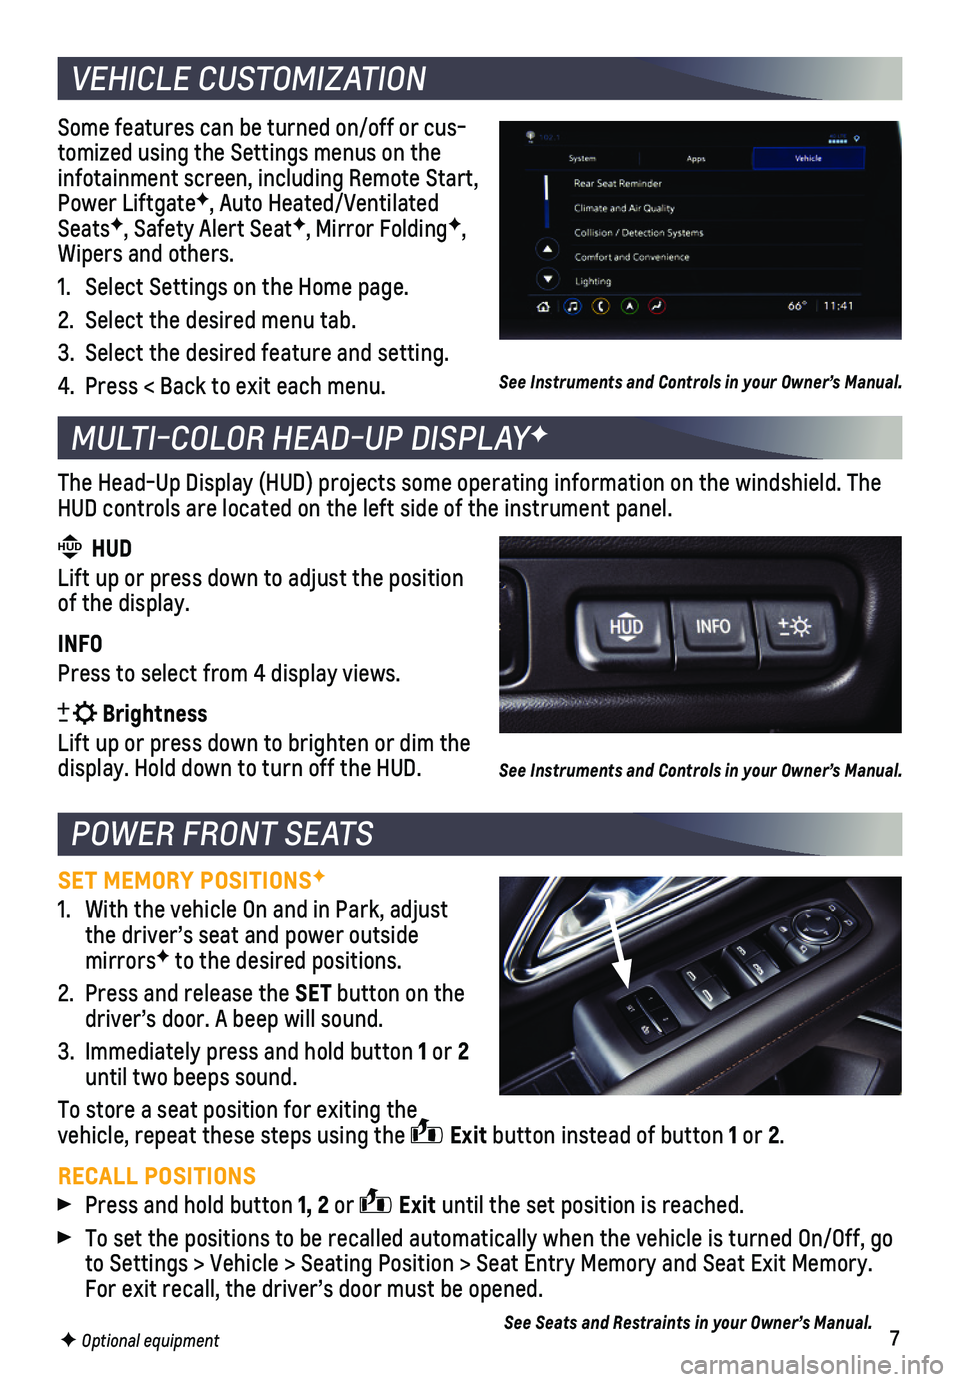 CHEVROLET SUBURBAN 2021  Get To Know Guide 7
Some features can be turned on/off or cus-tomized using the Settings menus on the infotainment screen, including Remote Start, Power LiftgateF, Auto Heated/Ventilated SeatsF, Safety Alert SeatF, Mir